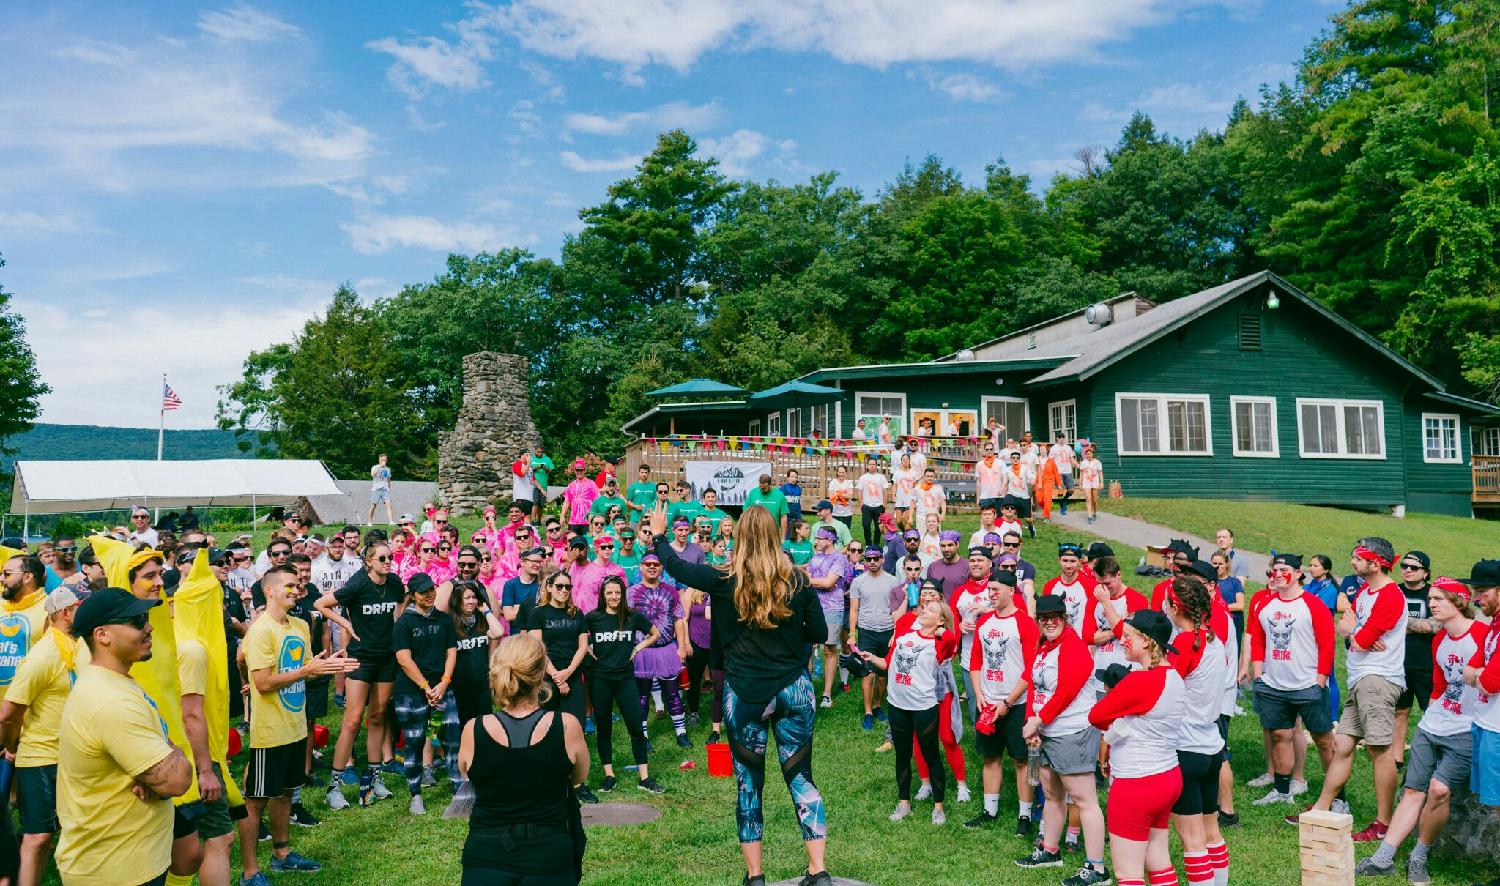 Each year we gather as a company for a few days in the summer to unplug, unwind and connect with each other at a camp in Western Massachusetts. 